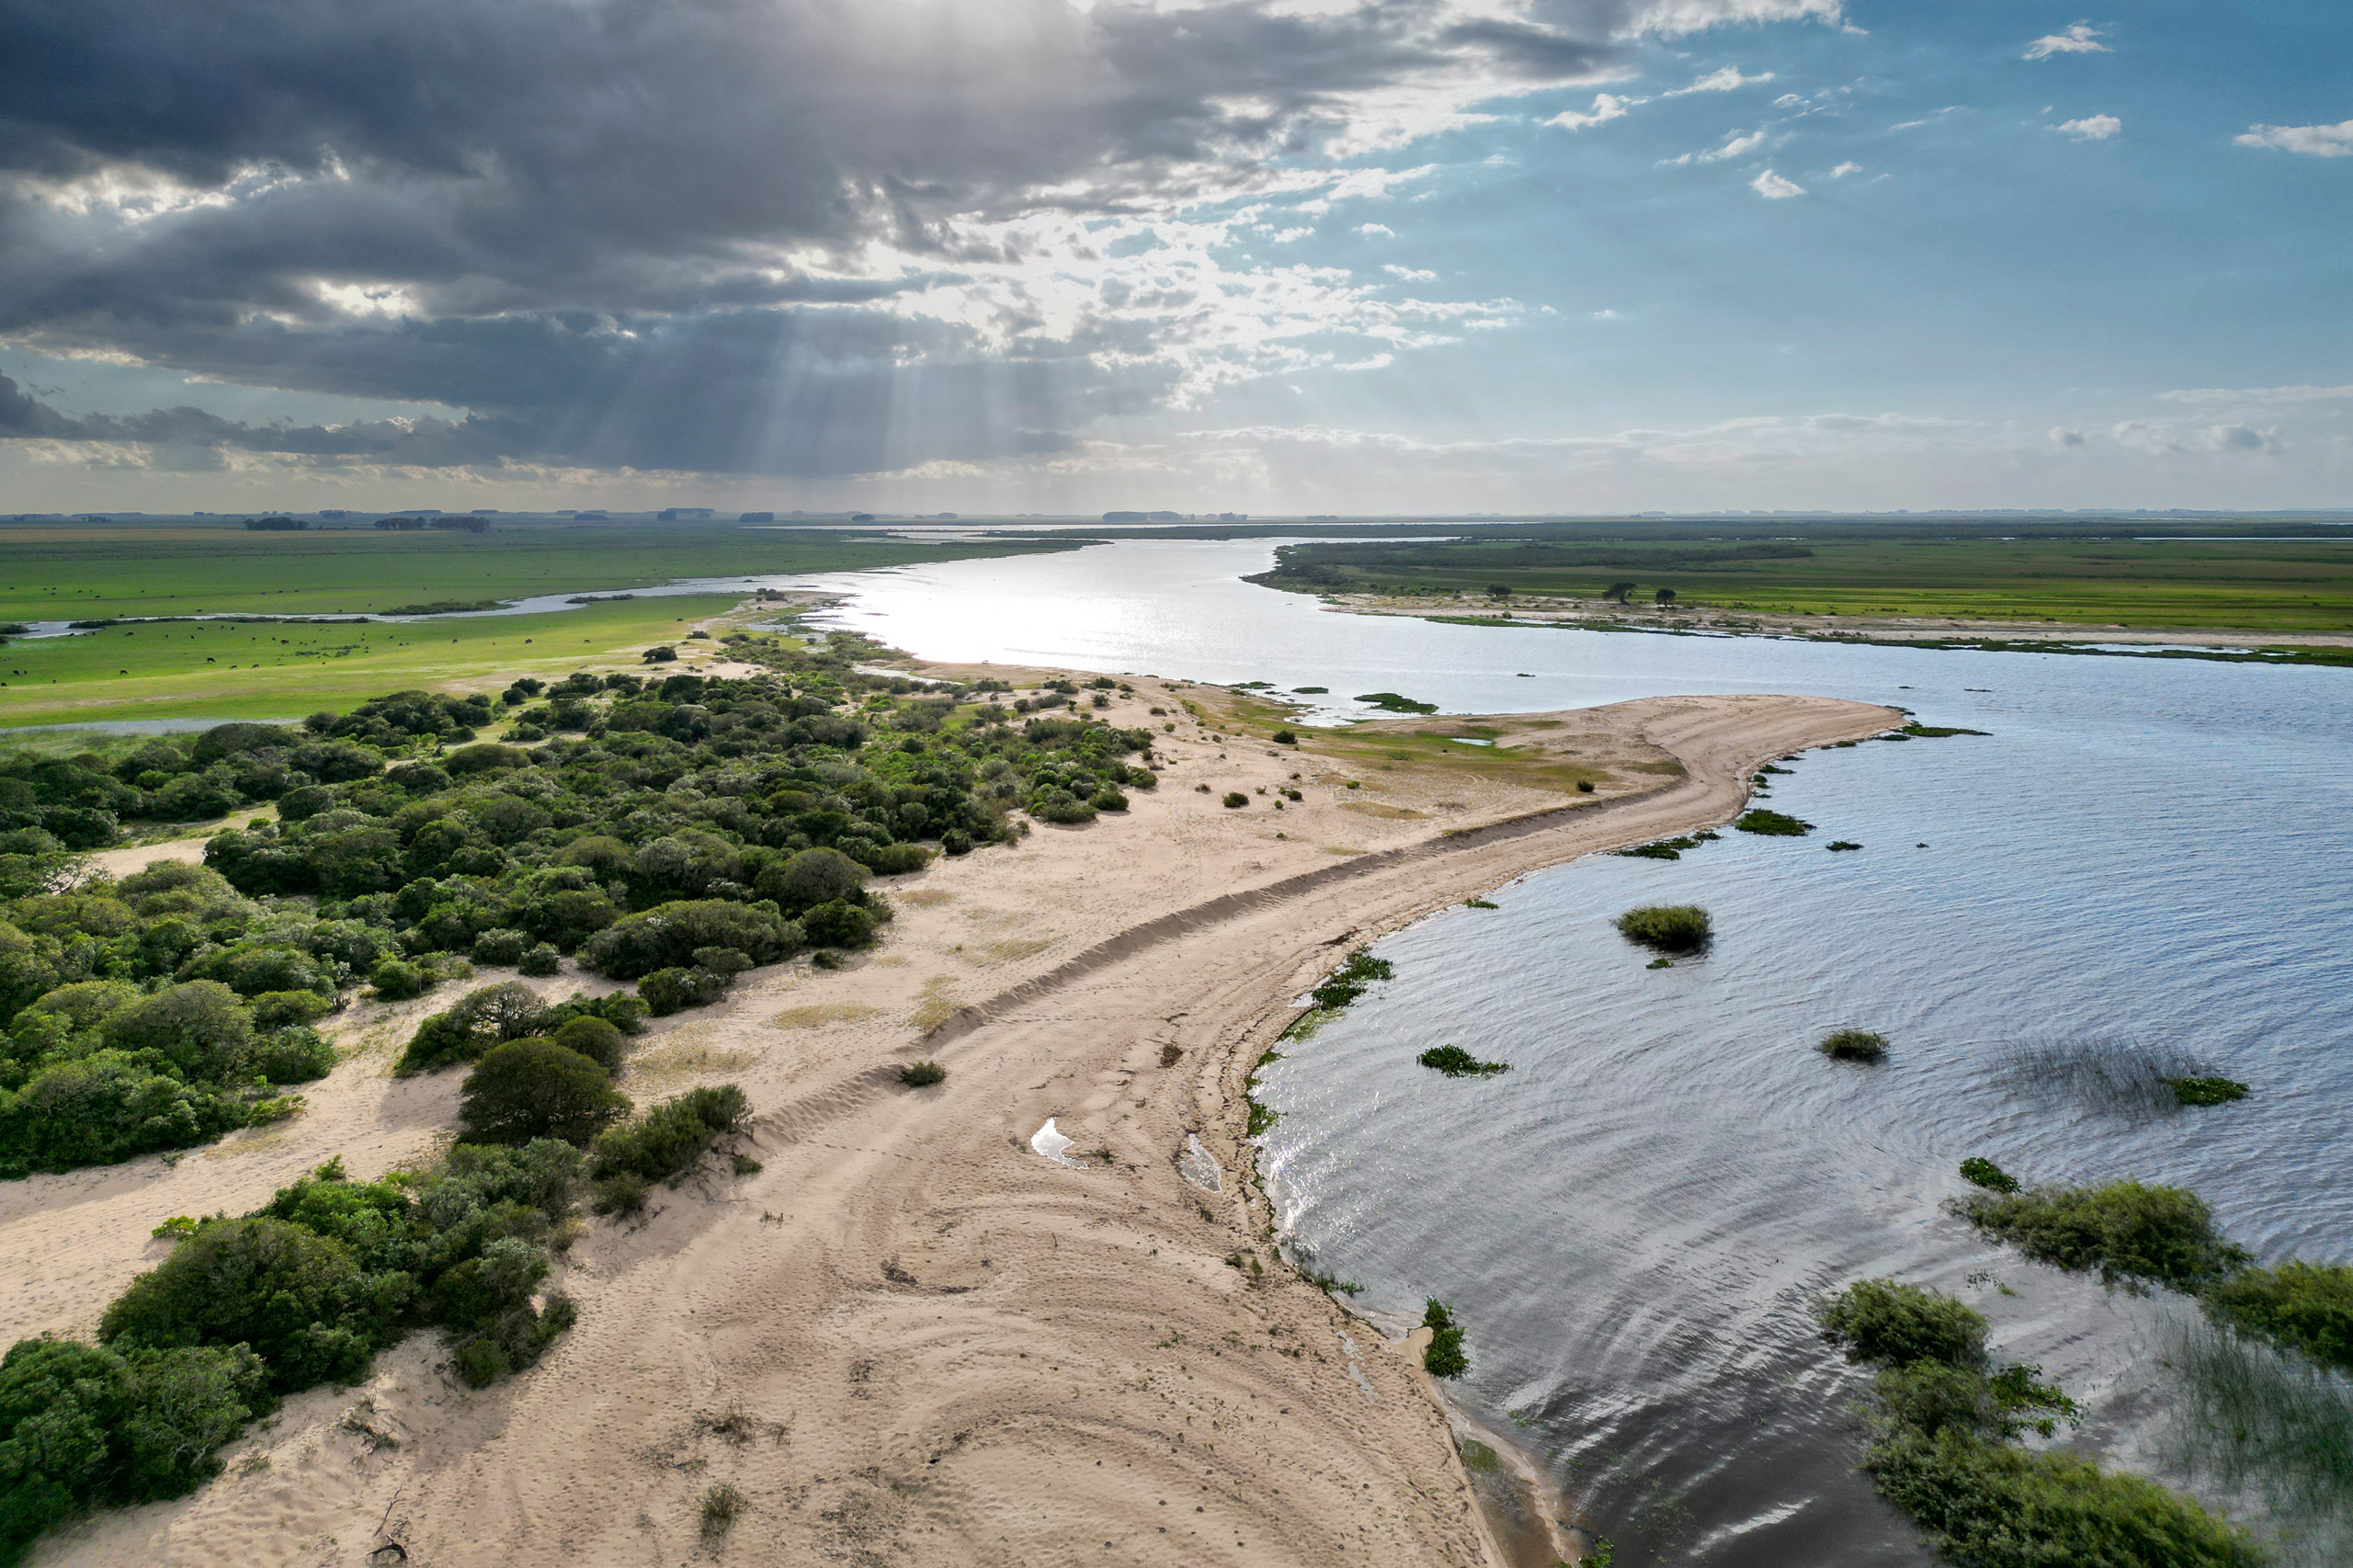 <p>The Tacuarí River meets Lake Merín, in eastern Uruguay. Brazil and Uruguay’s governments plan to link several watercourses to create a waterway that they say would reduce shipping costs and boost development. (Image: <a href="https://www.instagram.com/chatoeitan/">Eitan Abramovich</a> / Dialogue Earth)</p>